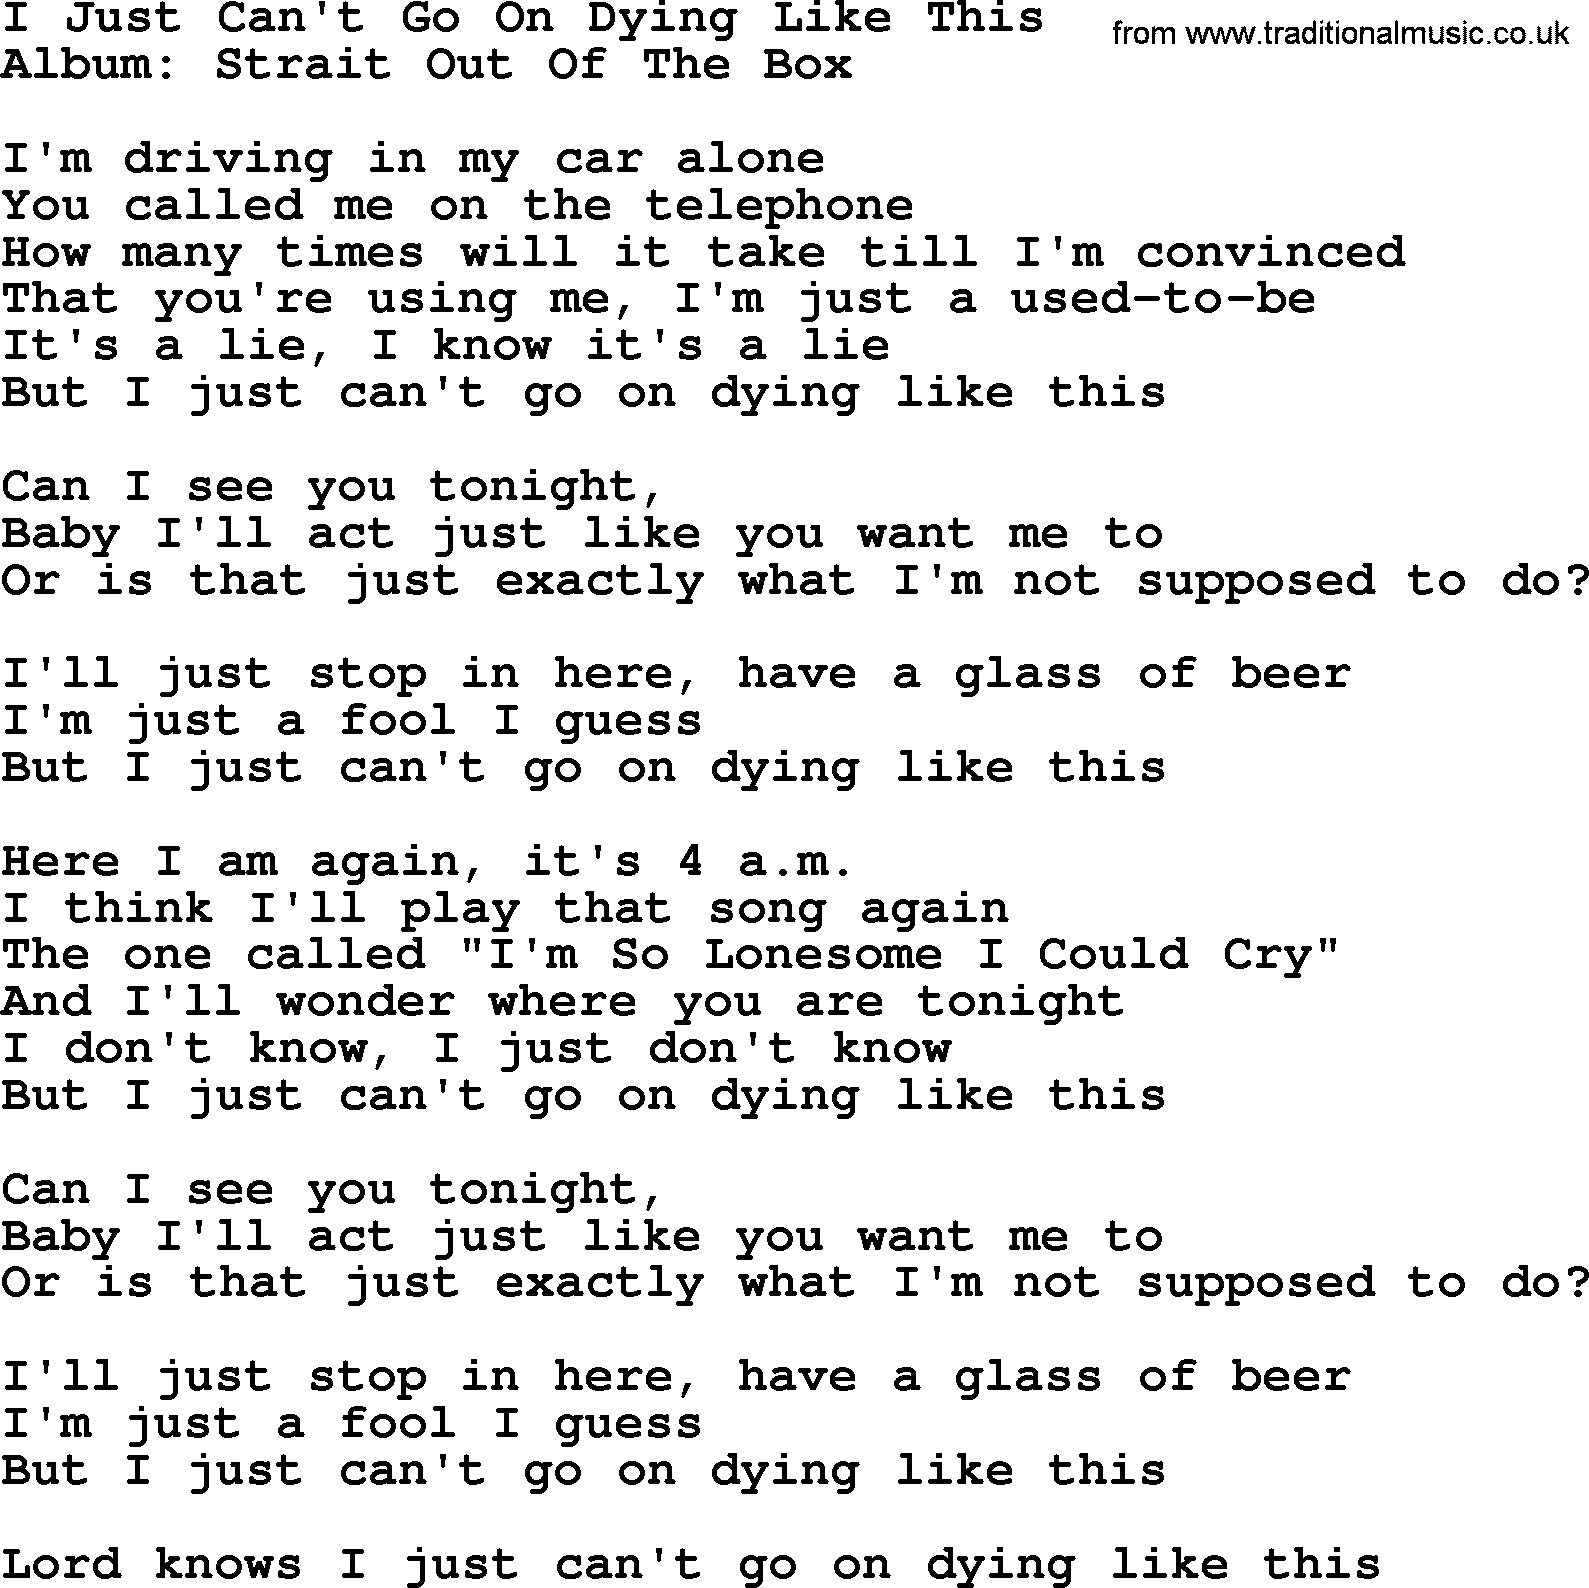 George Strait song: I Just Can't Go On Dying Like This, lyrics